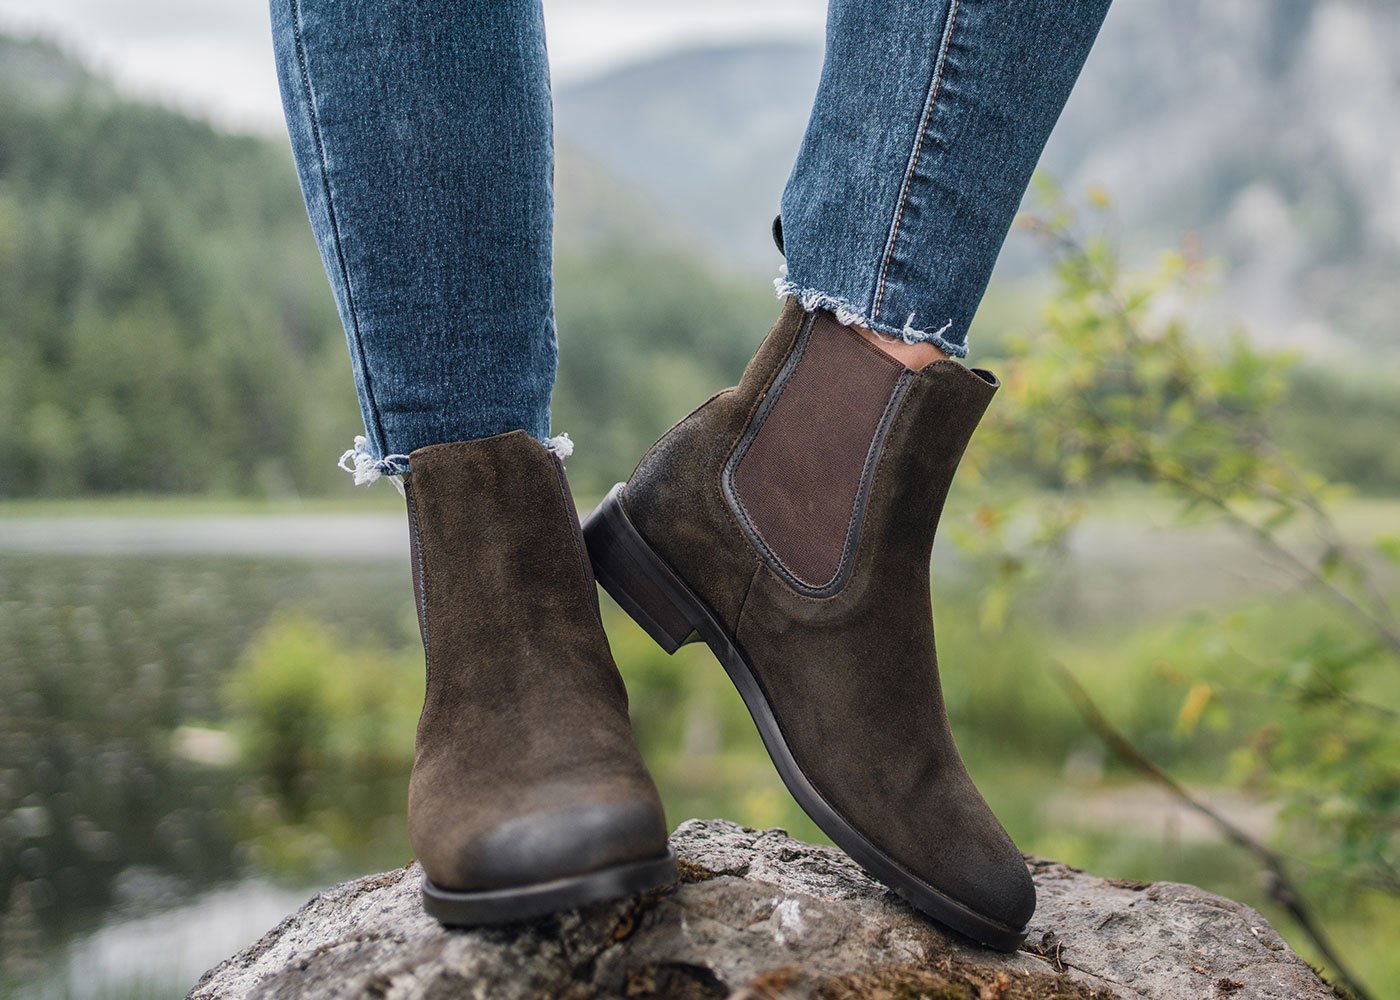 The Best Women's Boots to Buy in 2022 - Boot Company